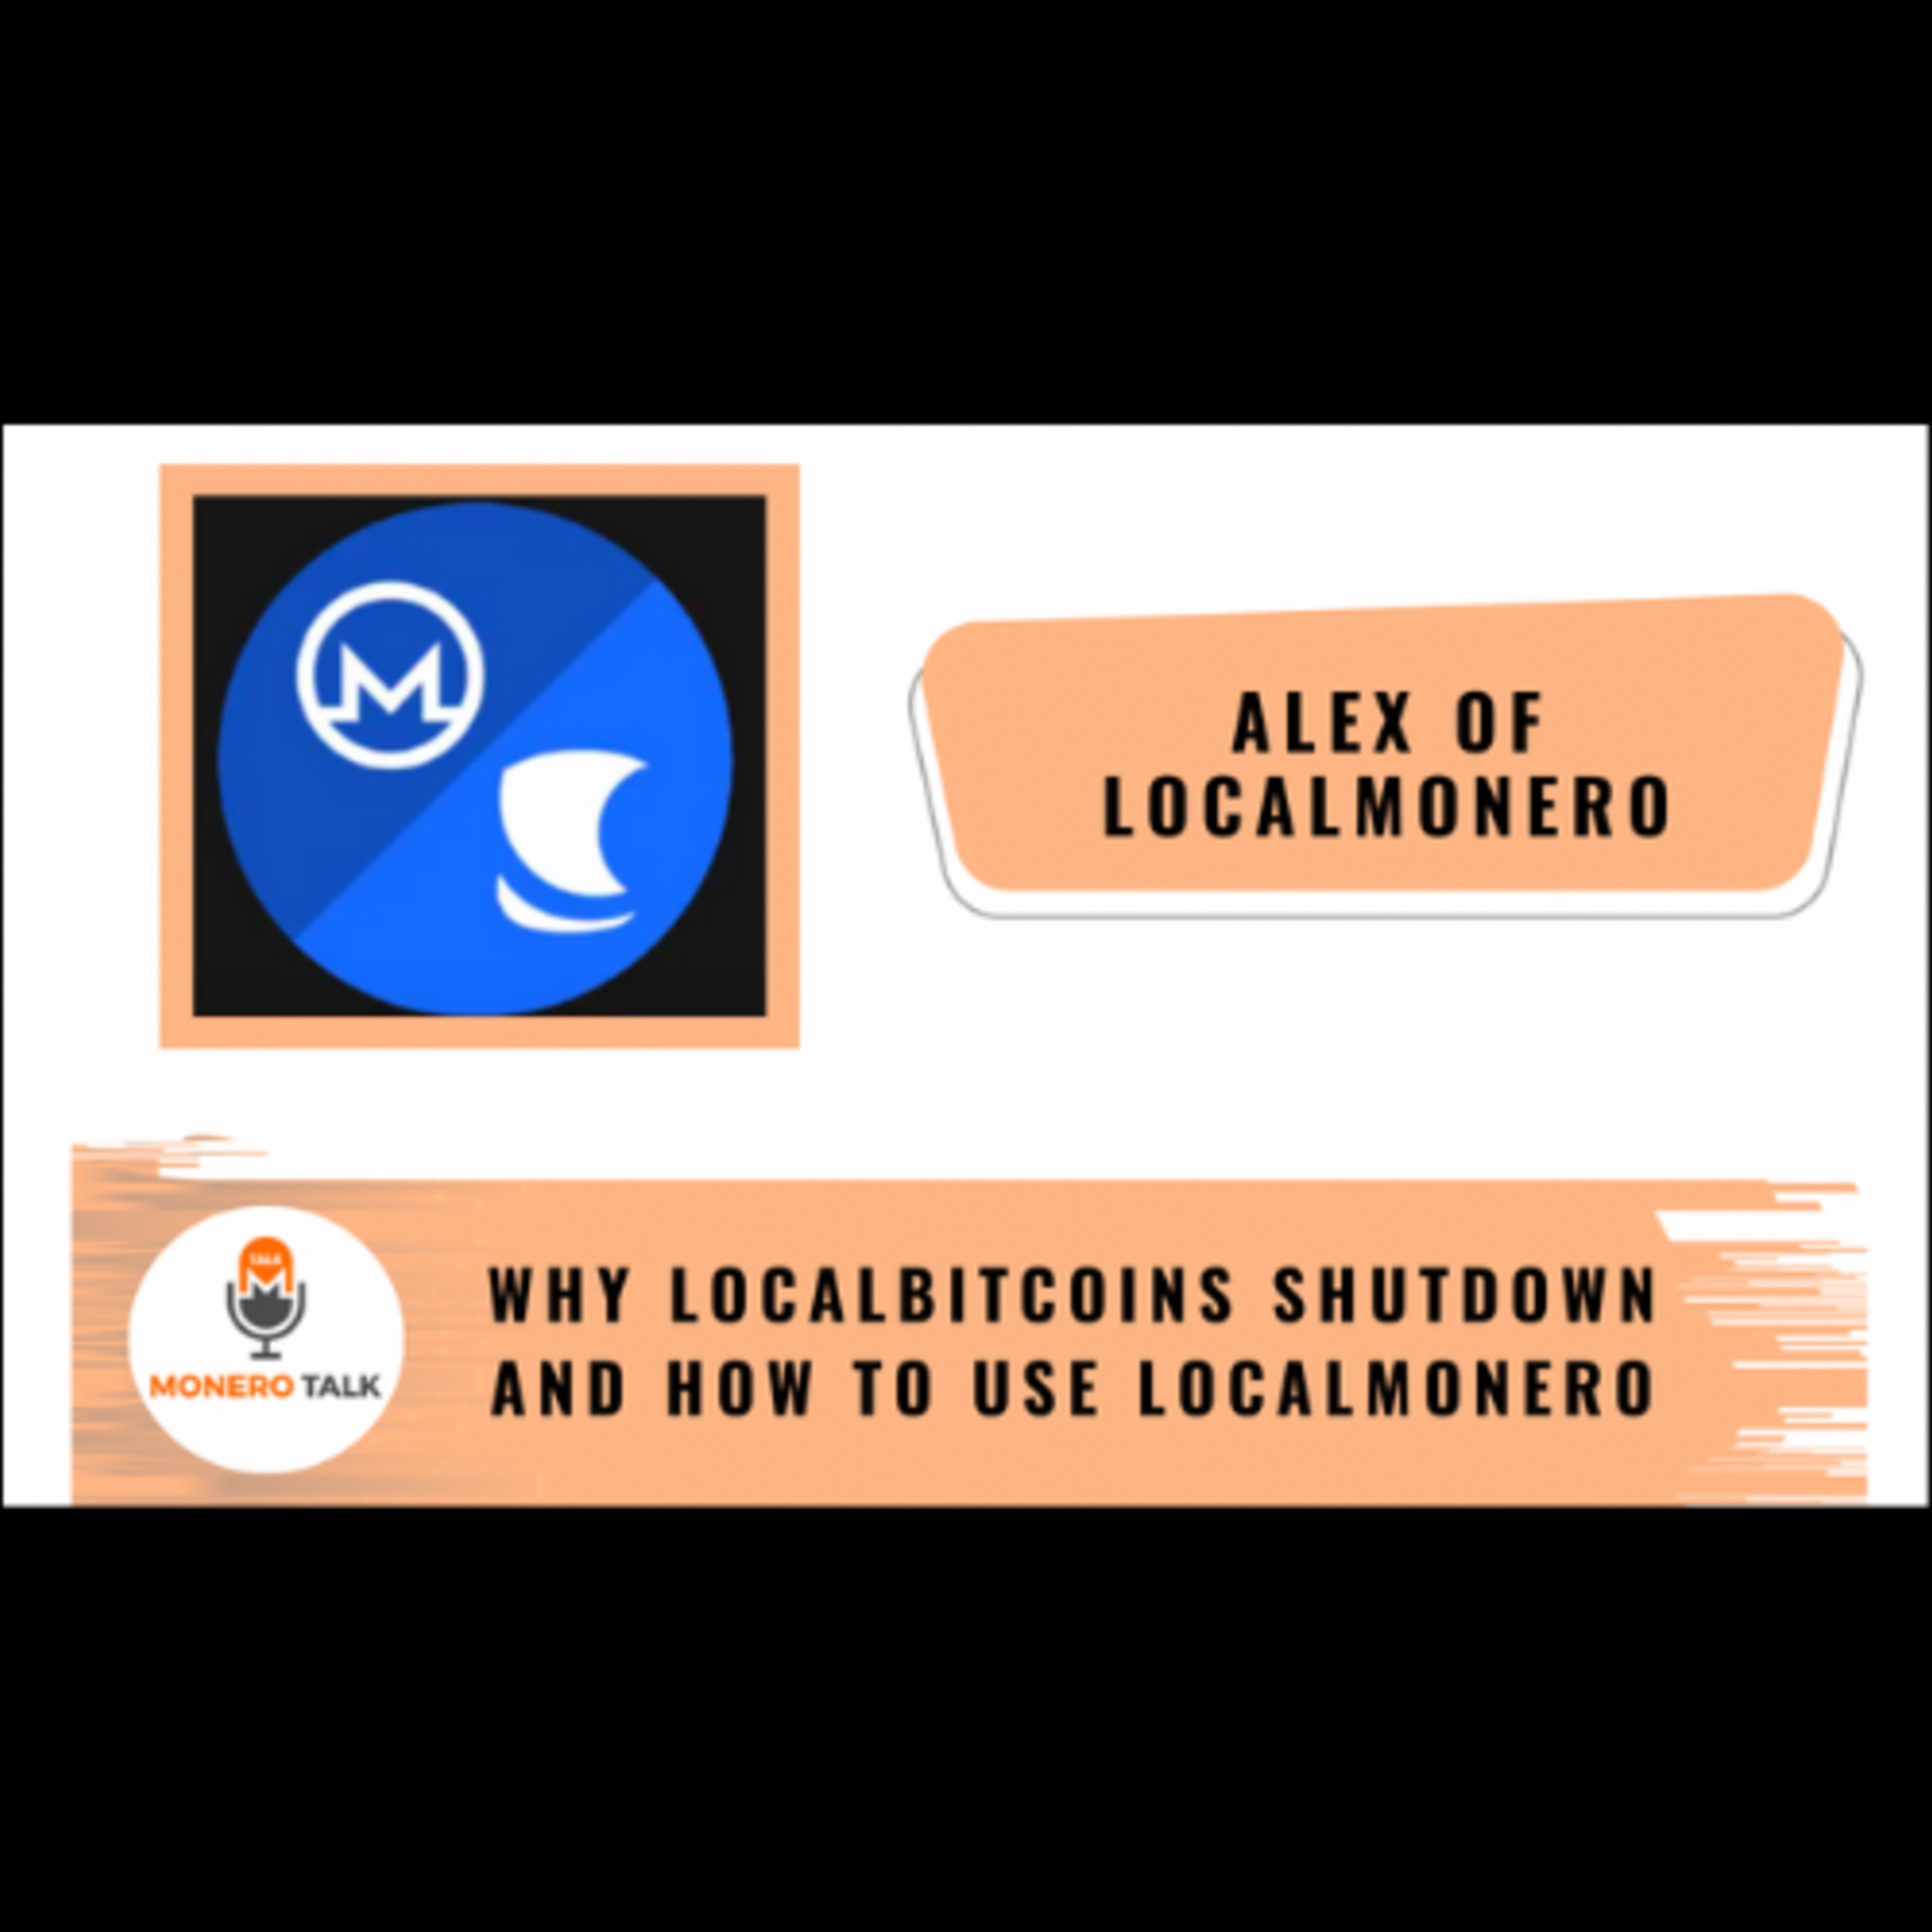 Why LocalBitcoins shutdown and how to use LocalMonero with its co-founder Alex